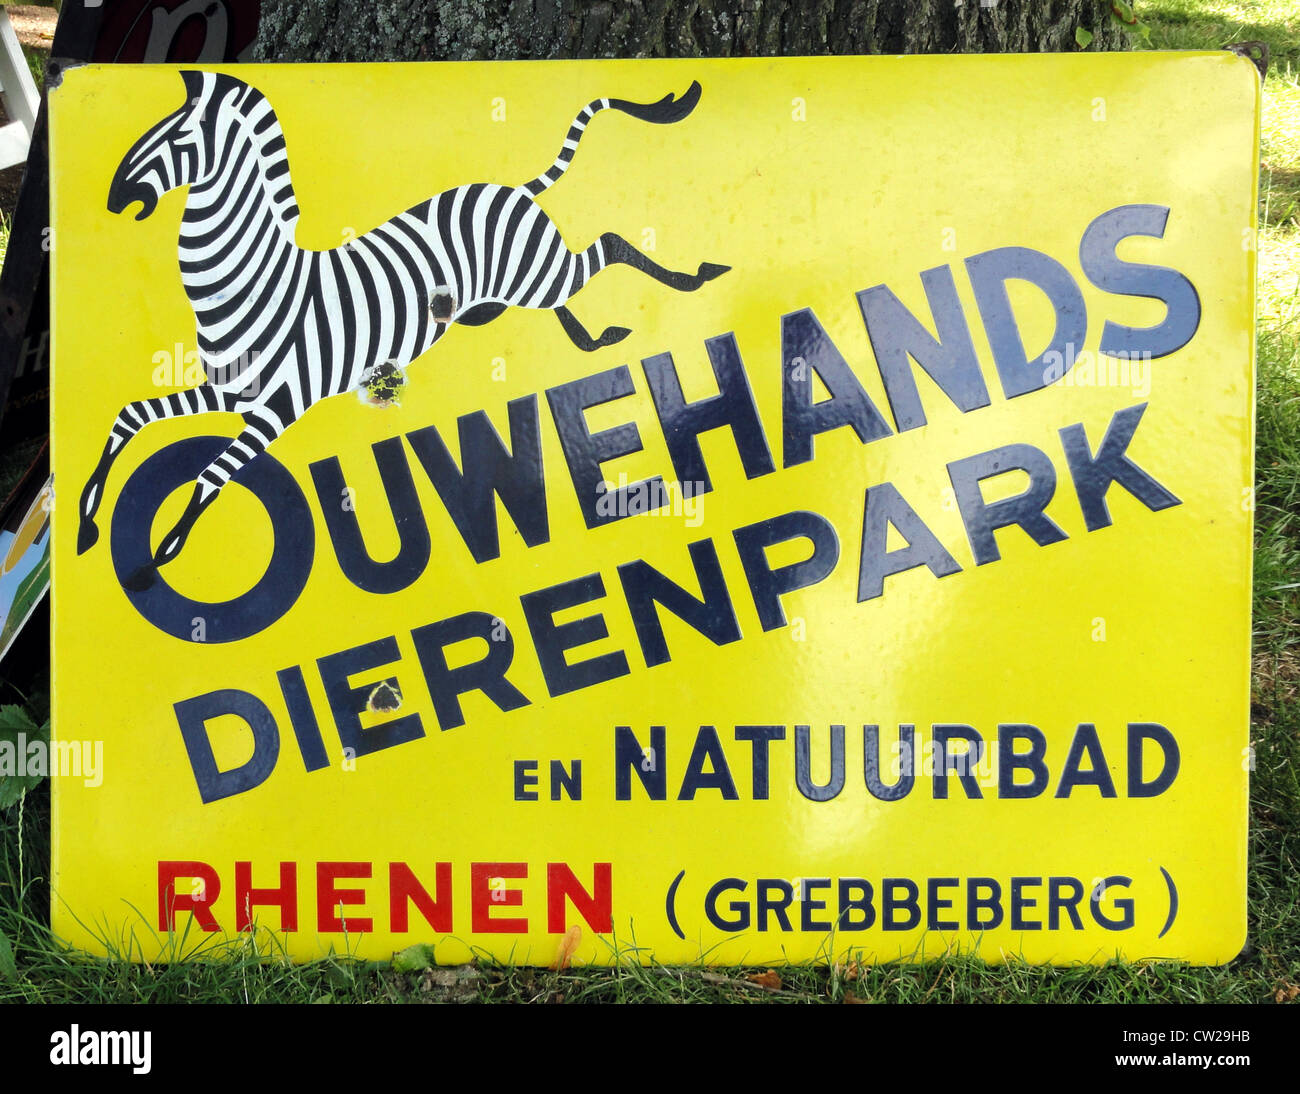 Ouwehands Dierenpark en Natuurbad. Emaille reclame bord. Foto Stock